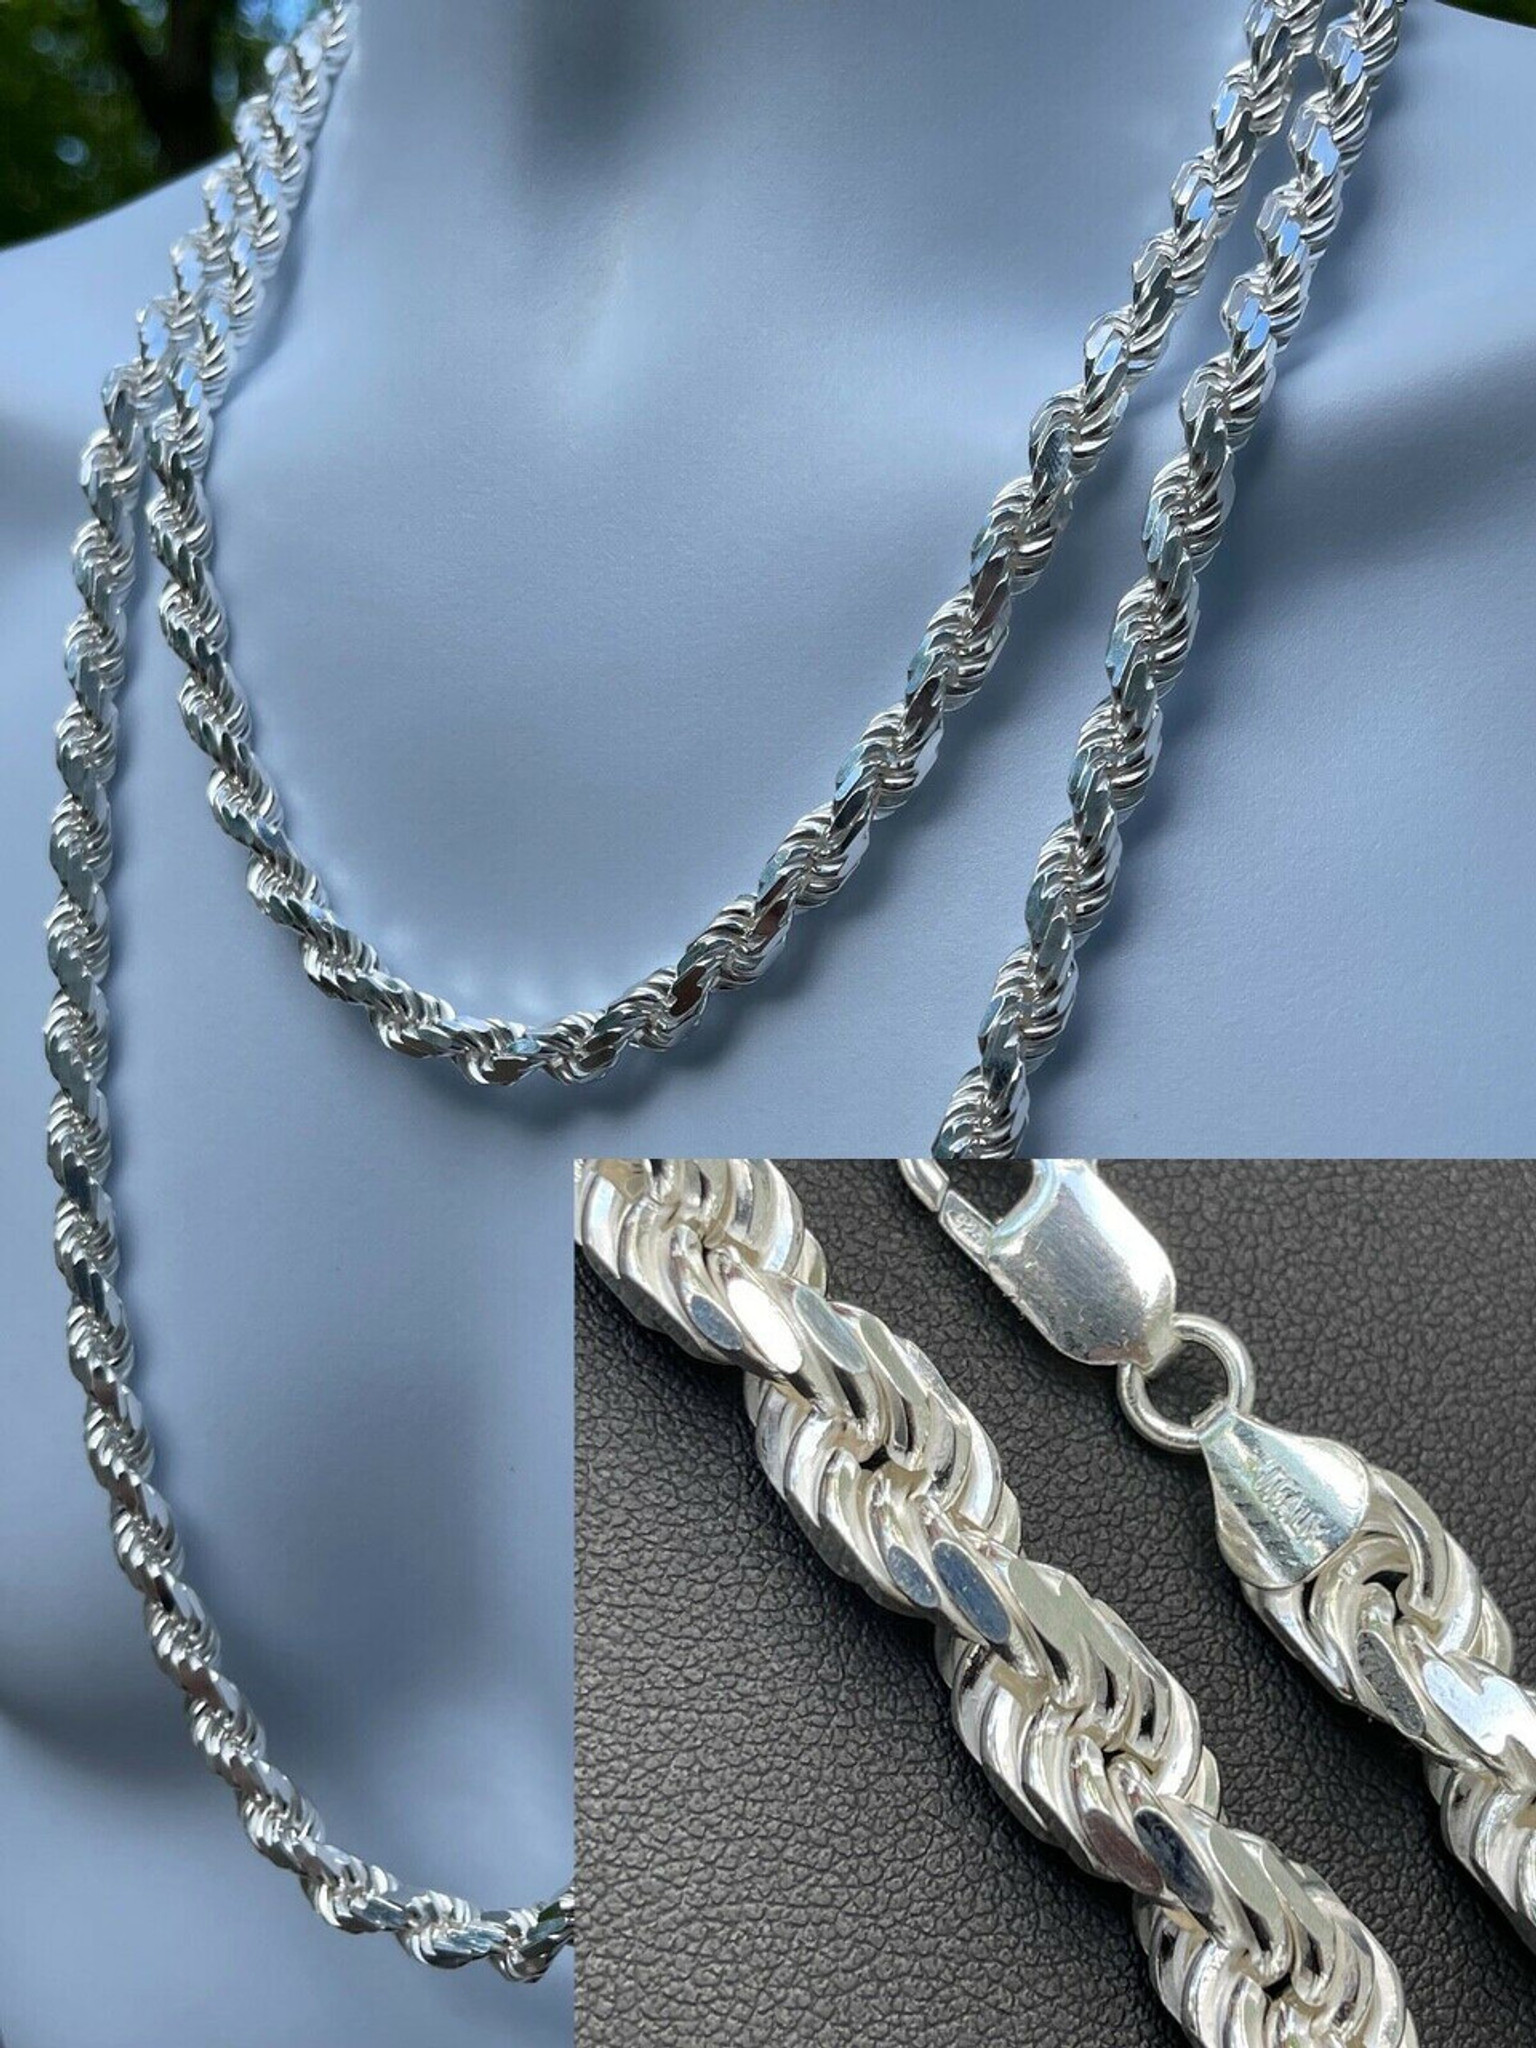 Real 925 Sterling Silver Diamond Cut Sparkle Ice Rope Chain Necklace 4mm  16-30